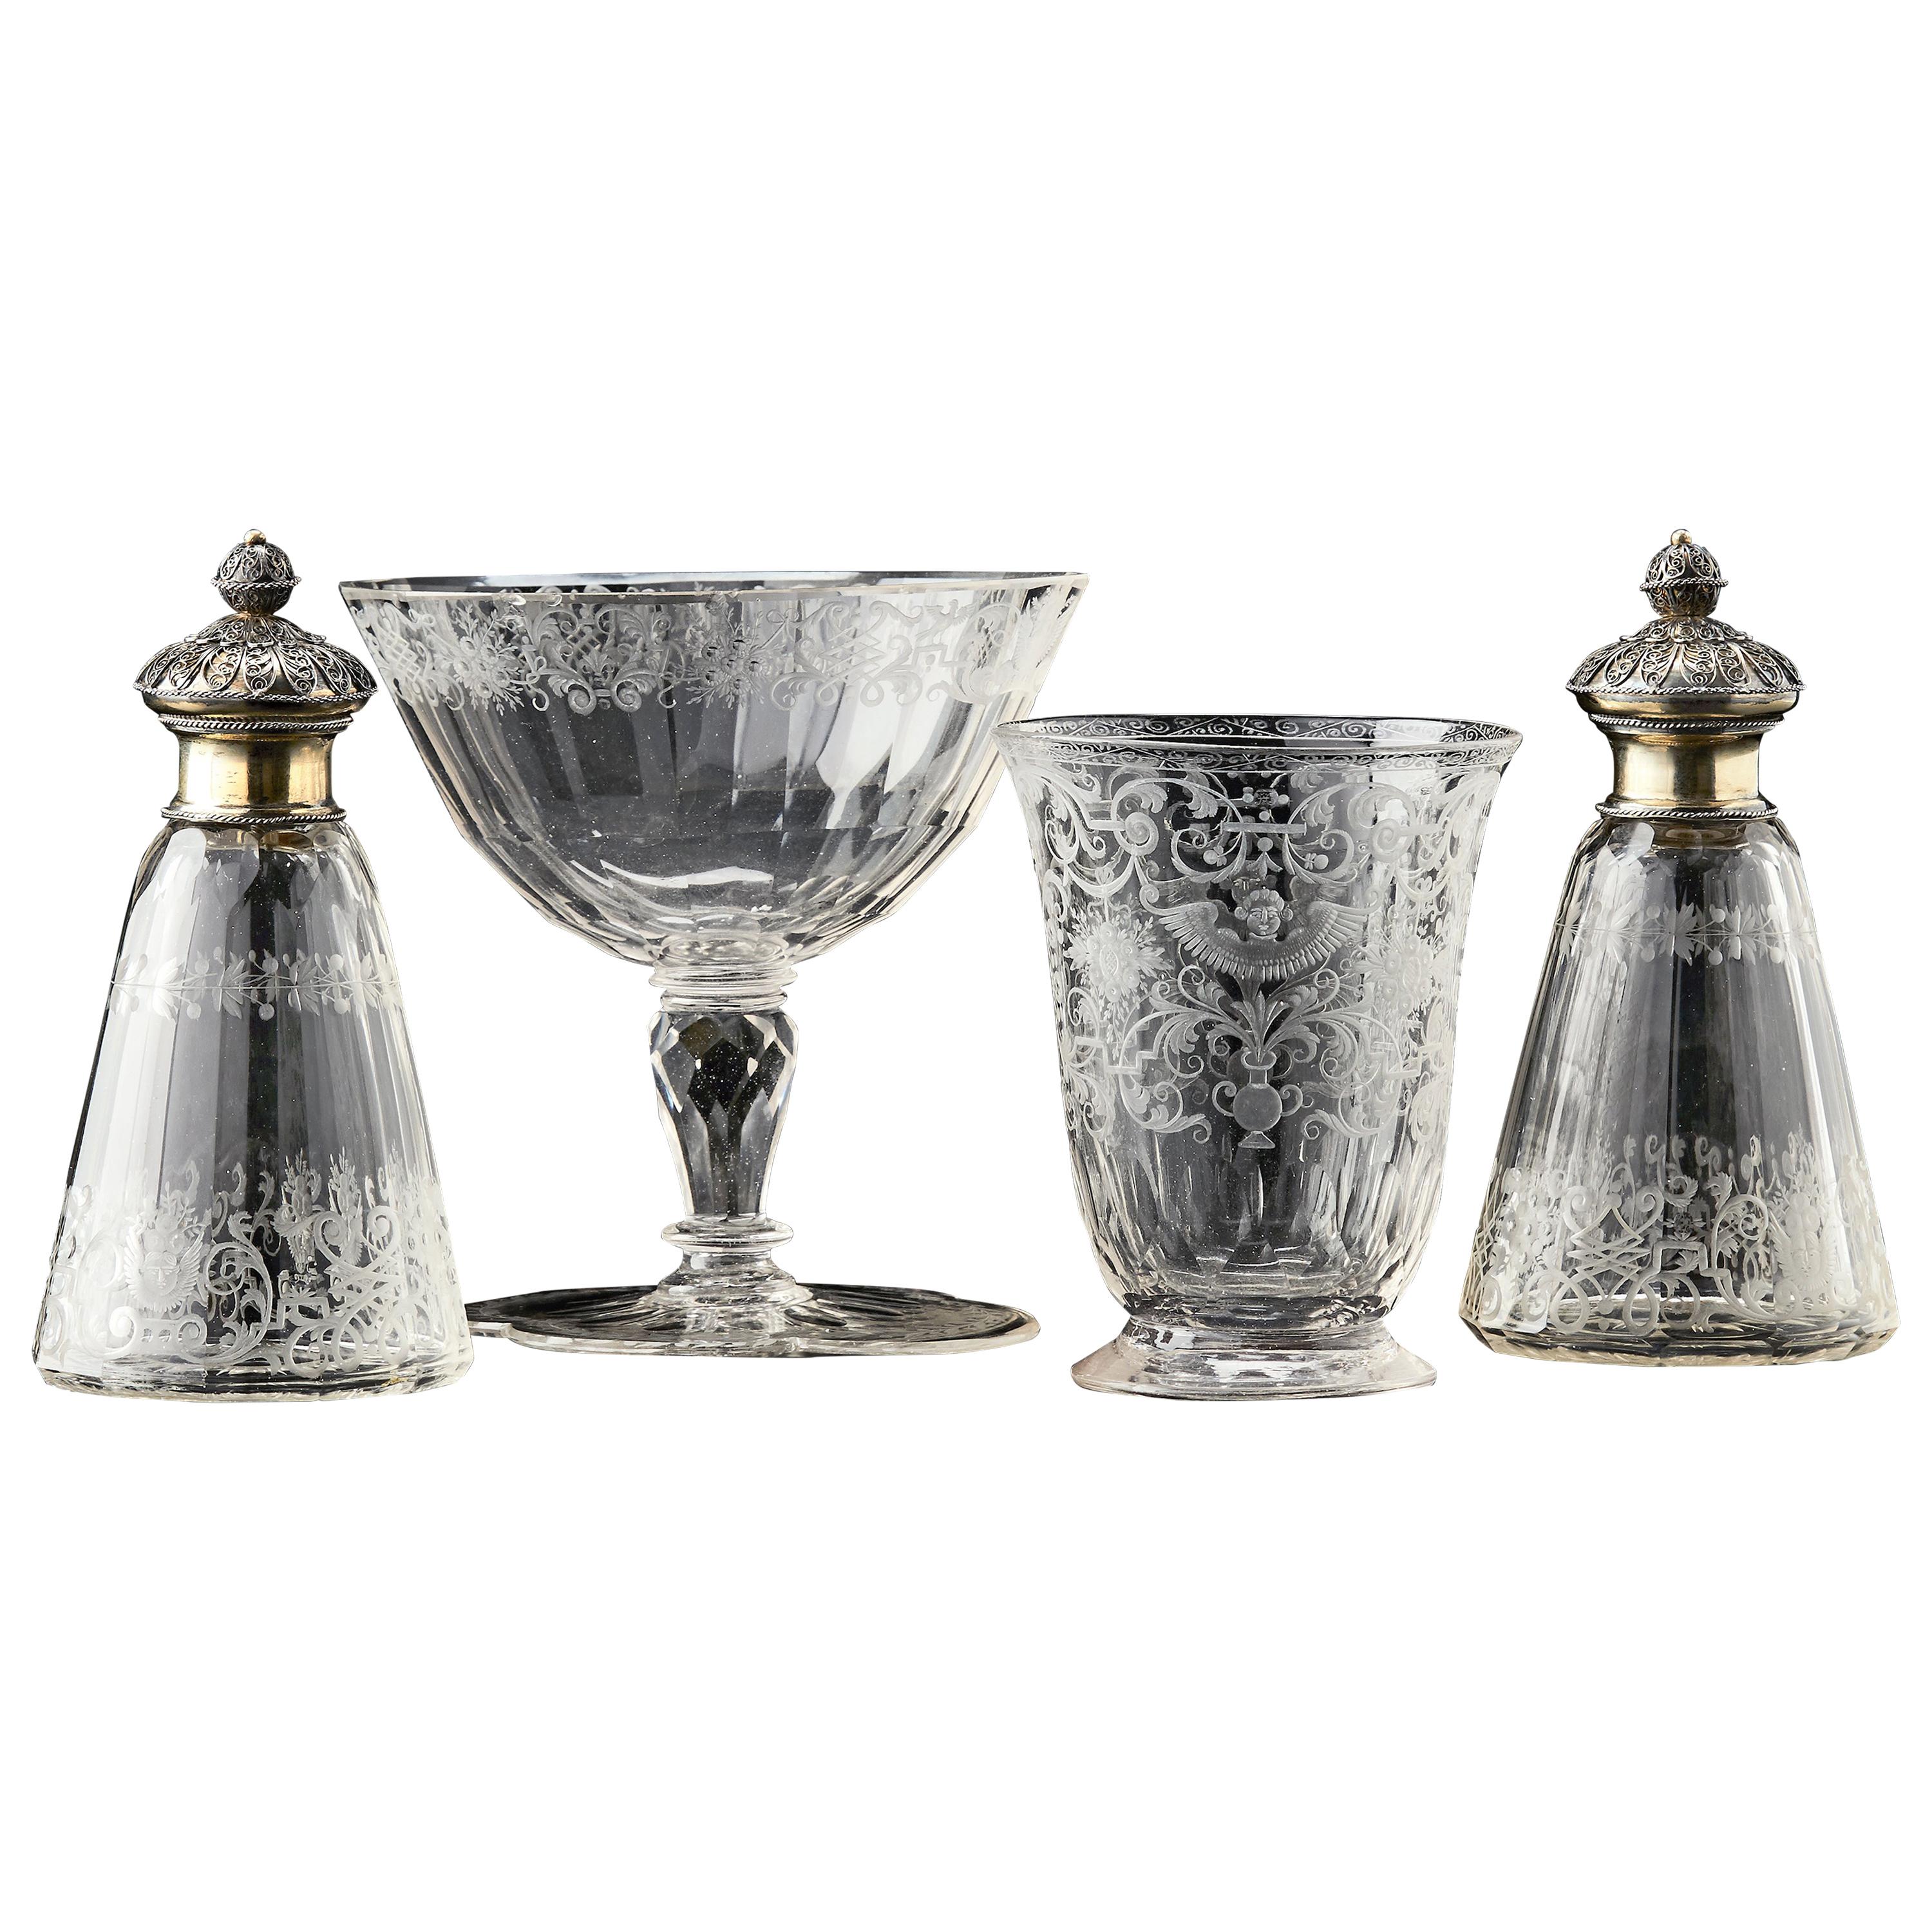 Cased Travelling Set of Engraved Glass Silesia, circa 1720